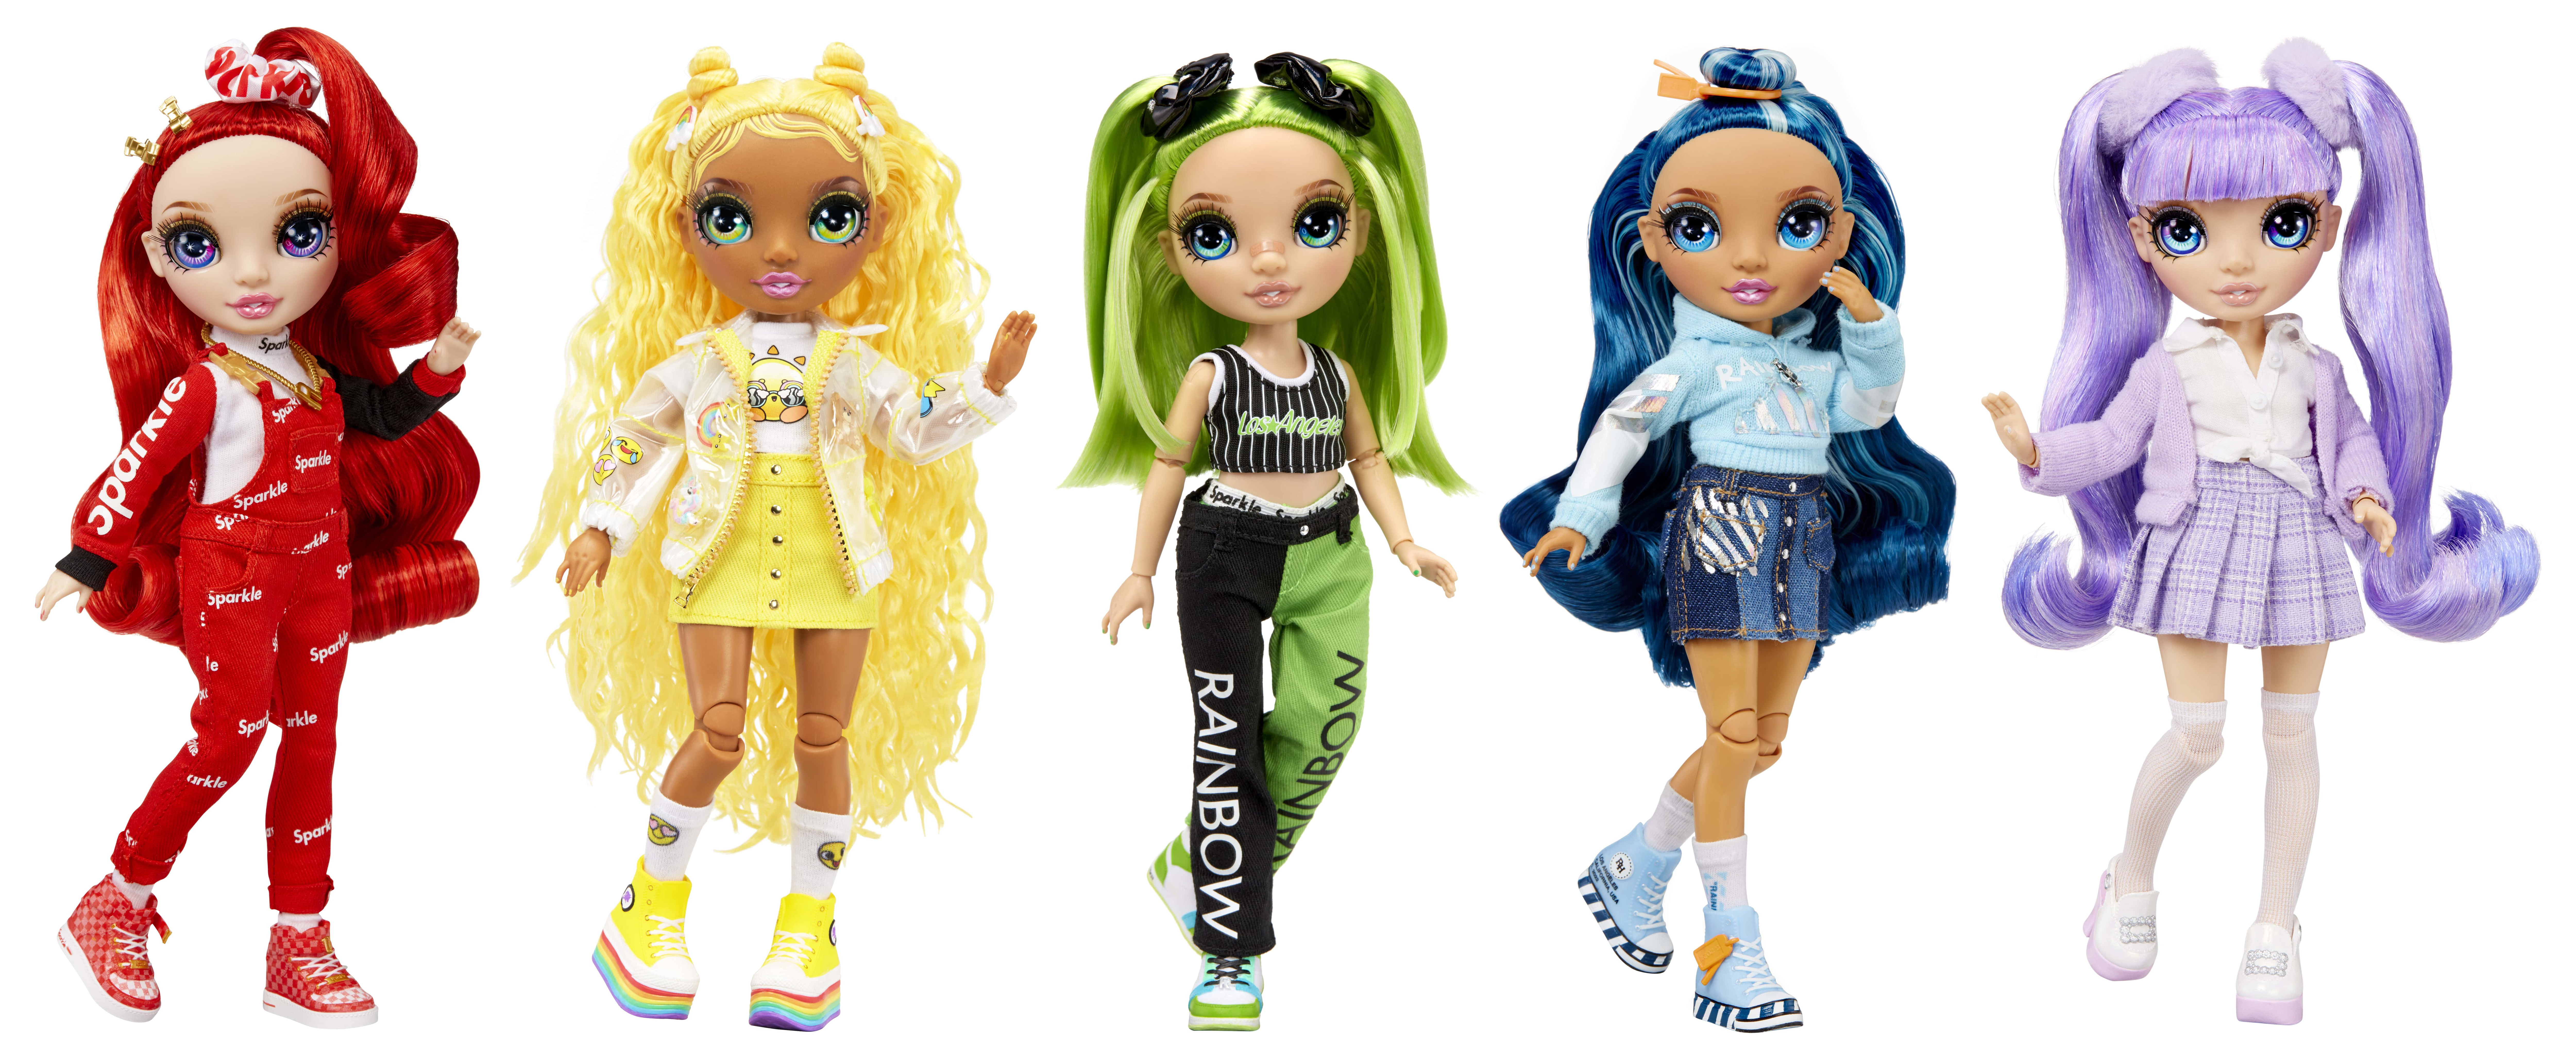 Rainbow High Exclusive with 5 Jr High Fashion Doll Favorites Ages 4 & up - image 3 of 10